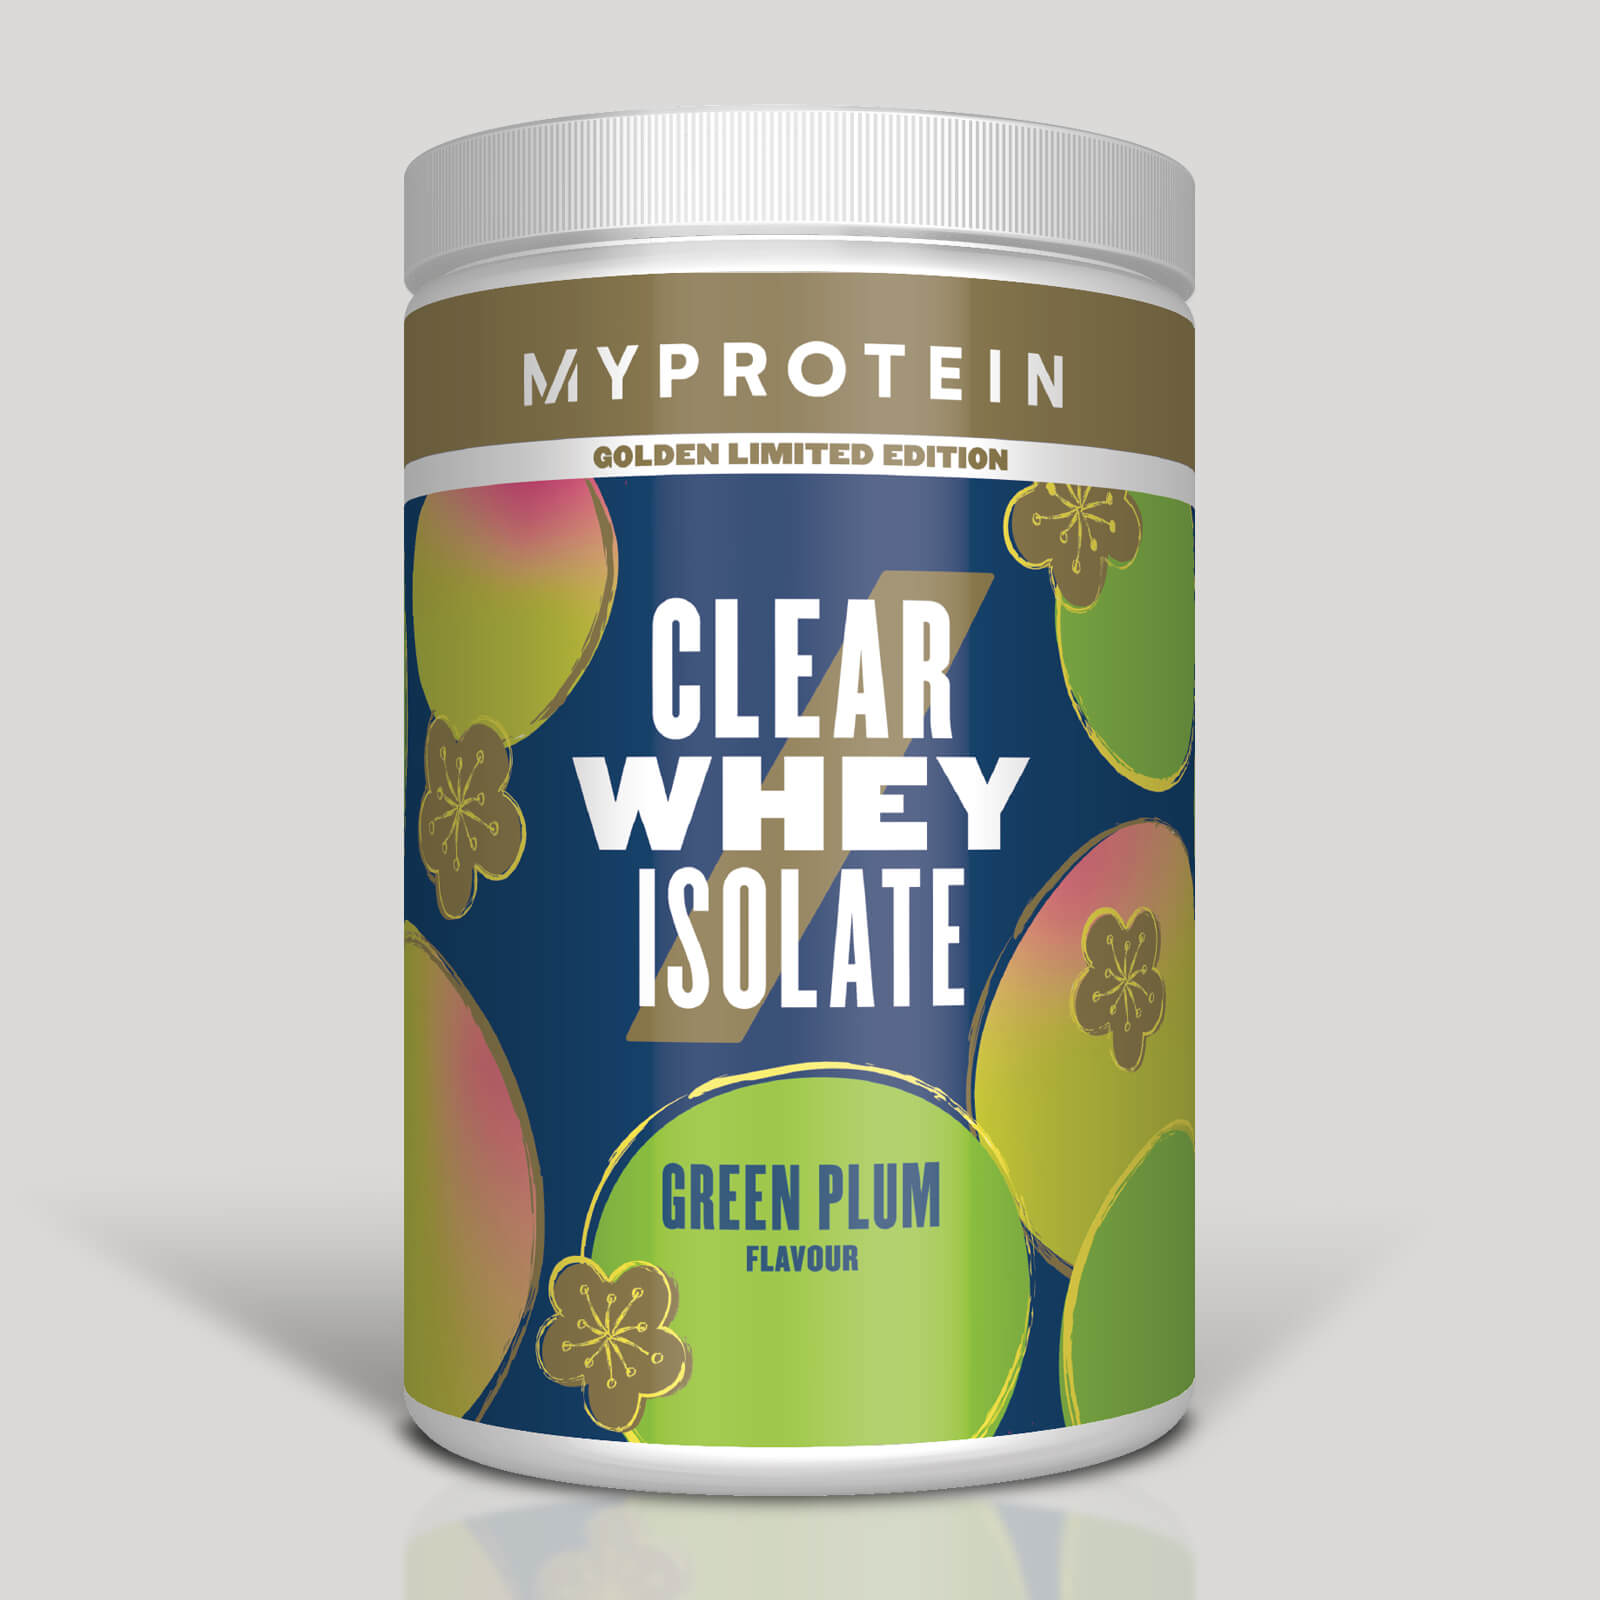 Myprotein Clear Whey Isolate, Green Plum (ALT) - 20servings - Green Plum